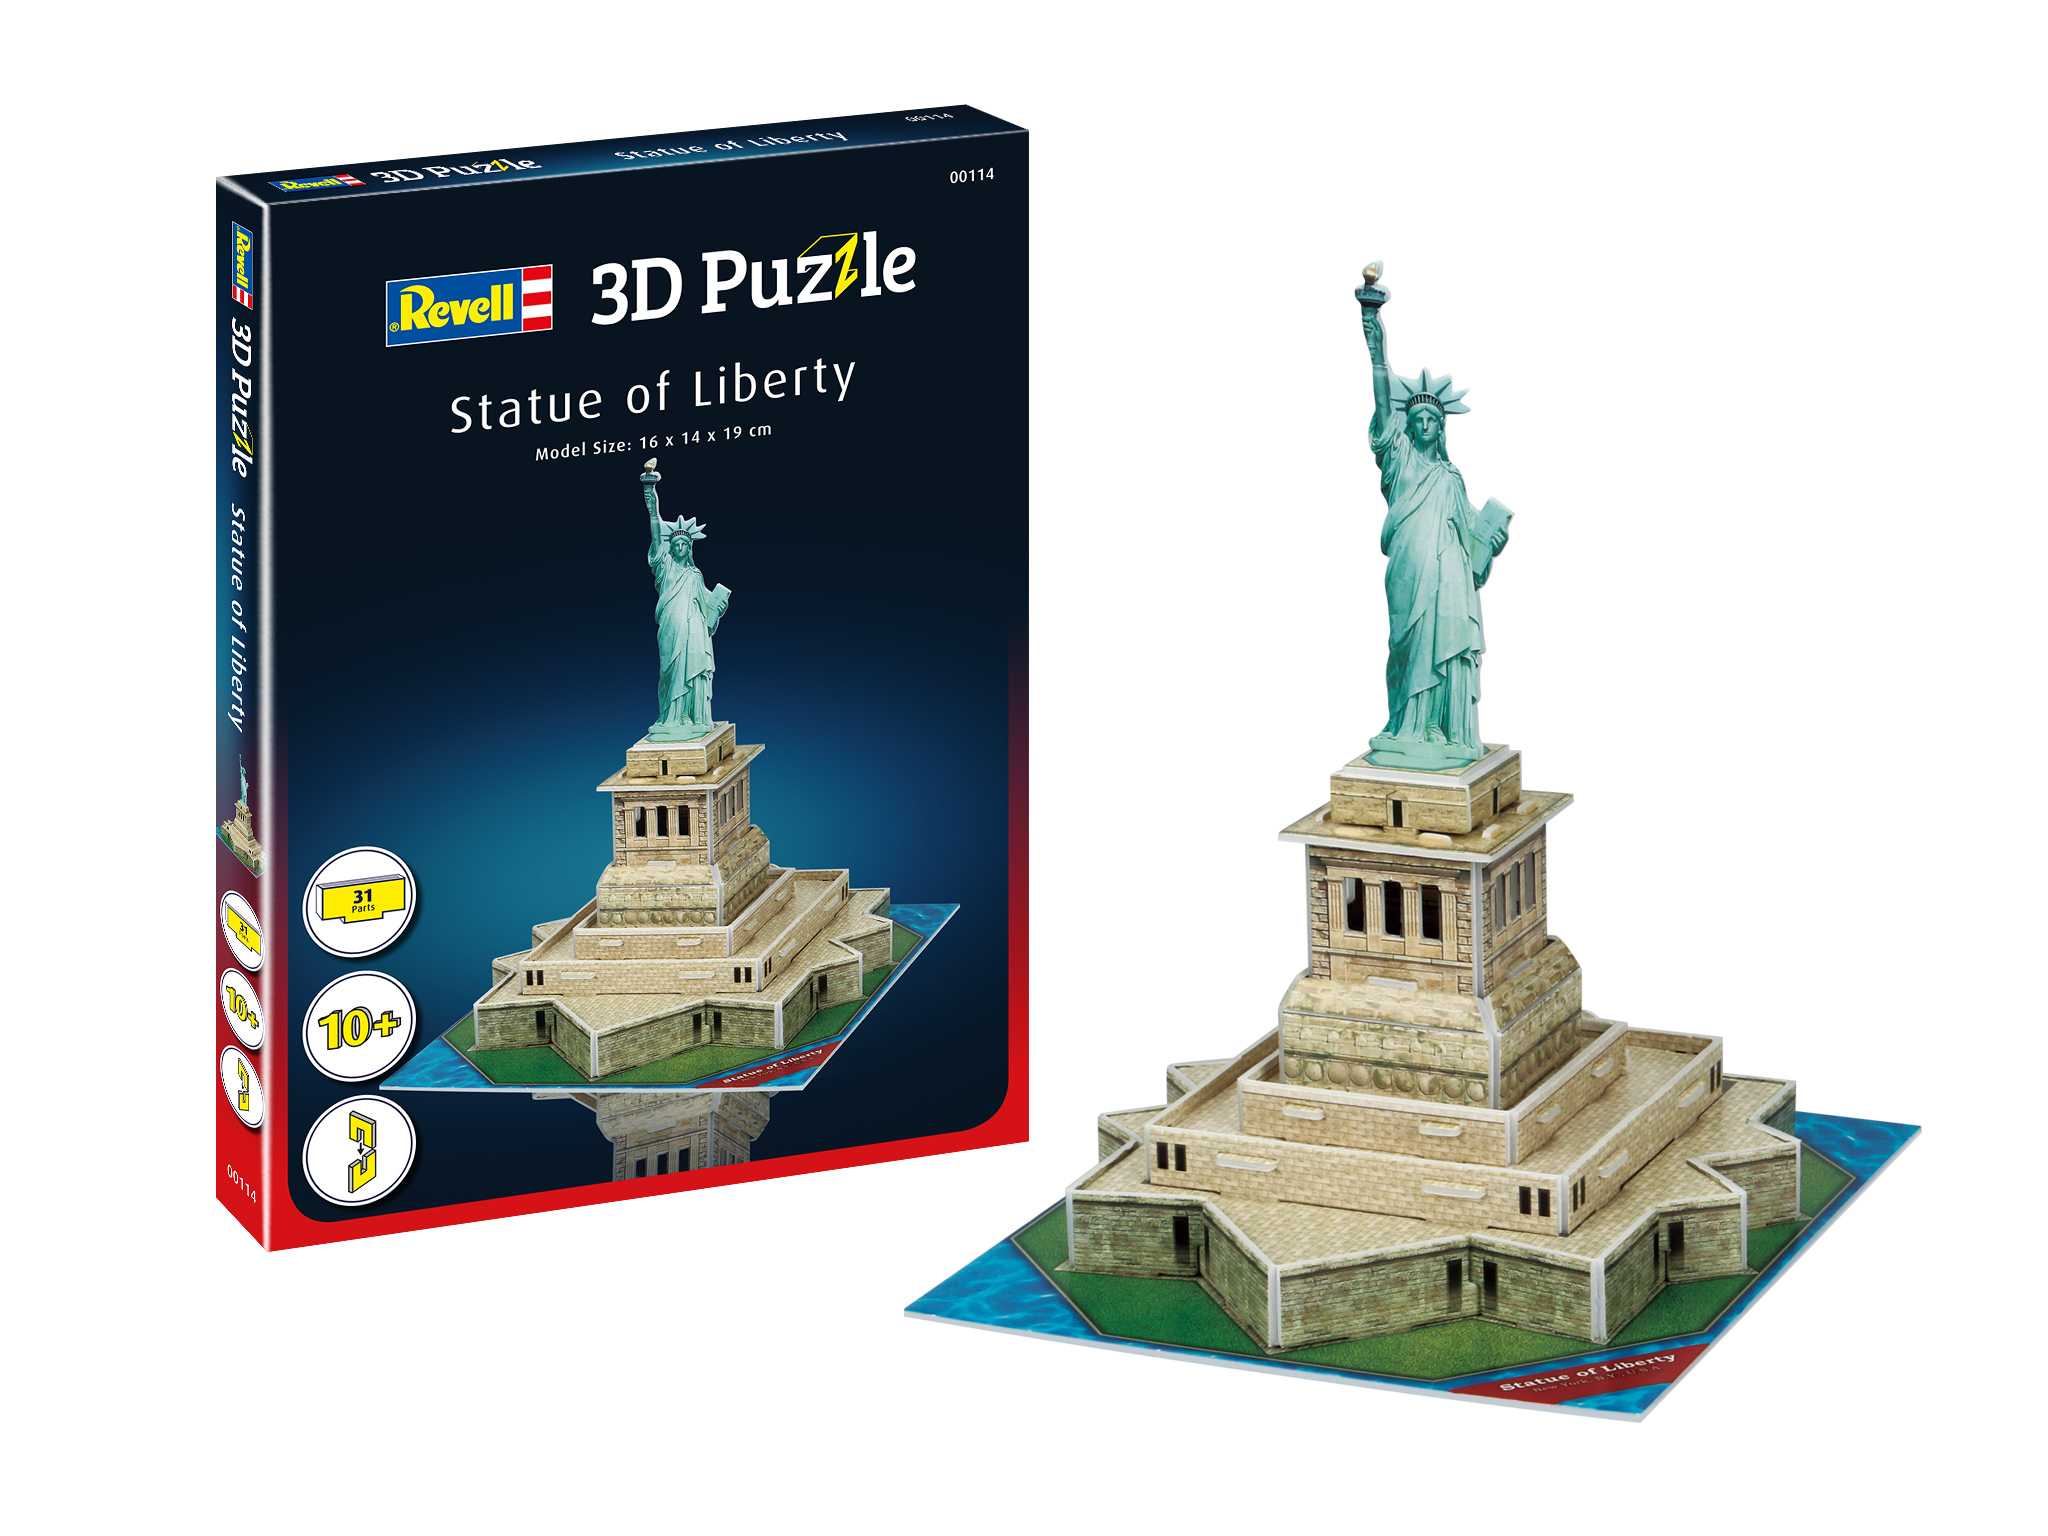 Revell 3D Puzzle Statue of Liberty